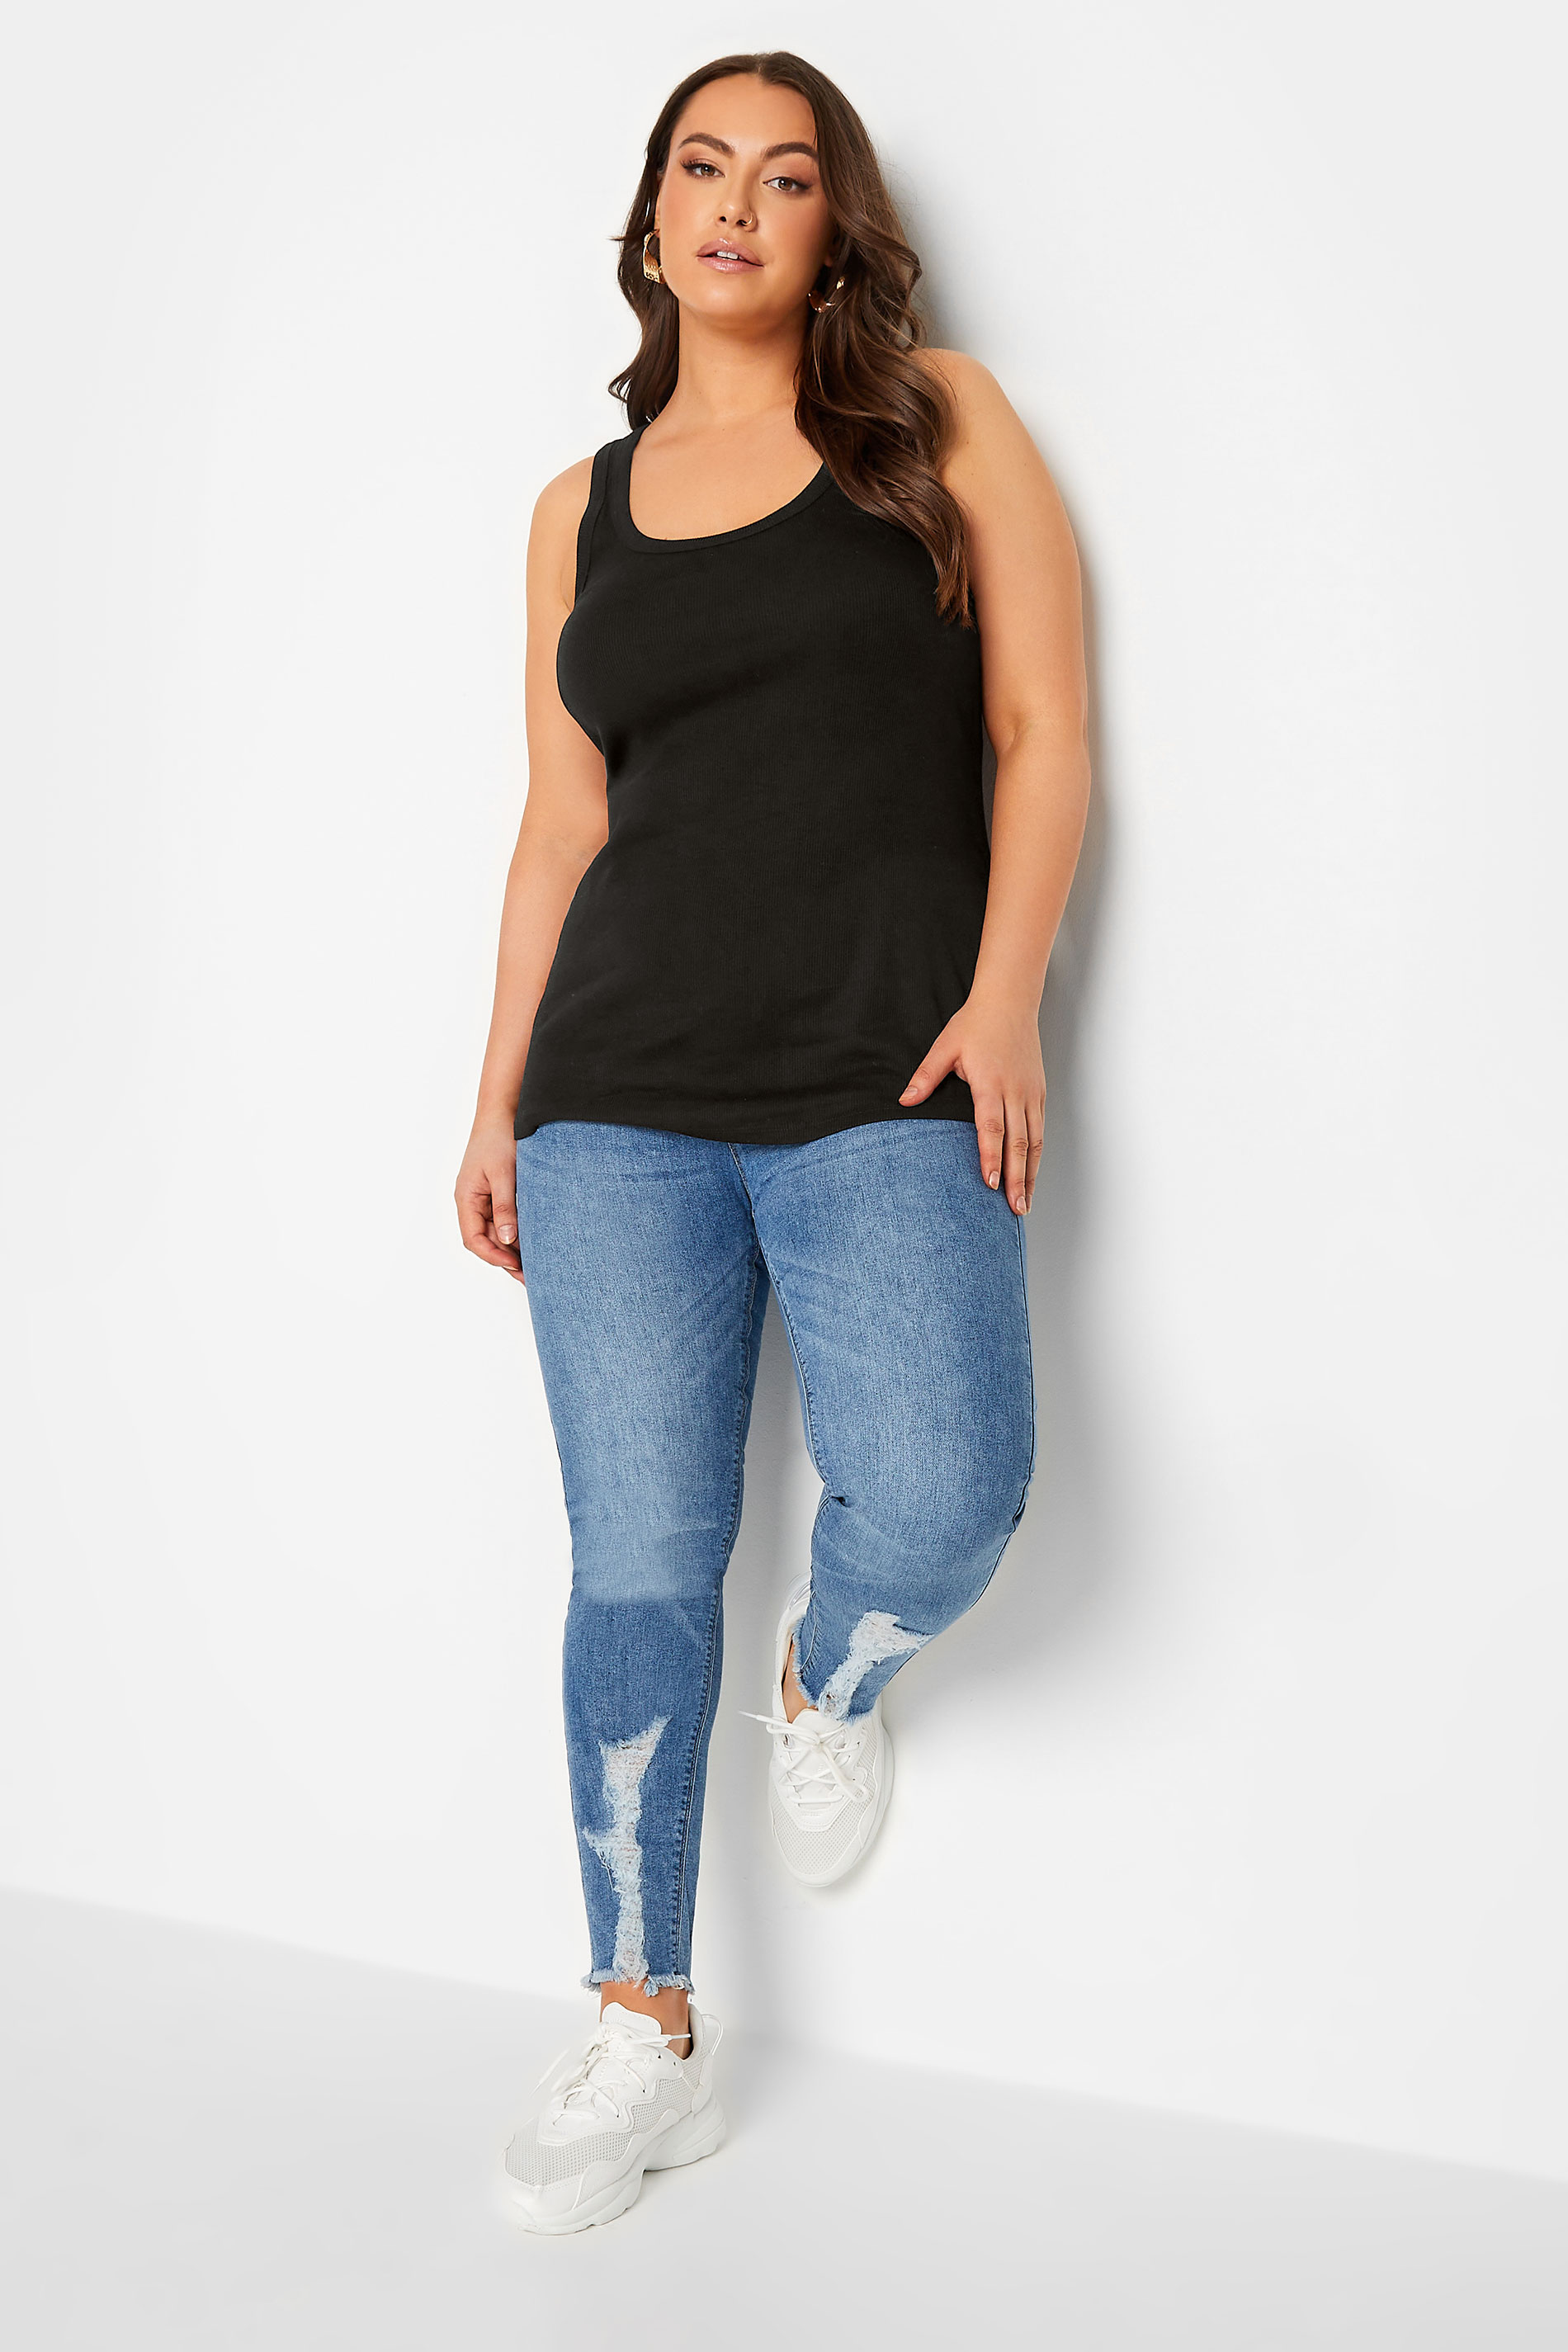 YOURS Plus Size Black Ribbed Racer Back Vest Top | Yours Clothing  3